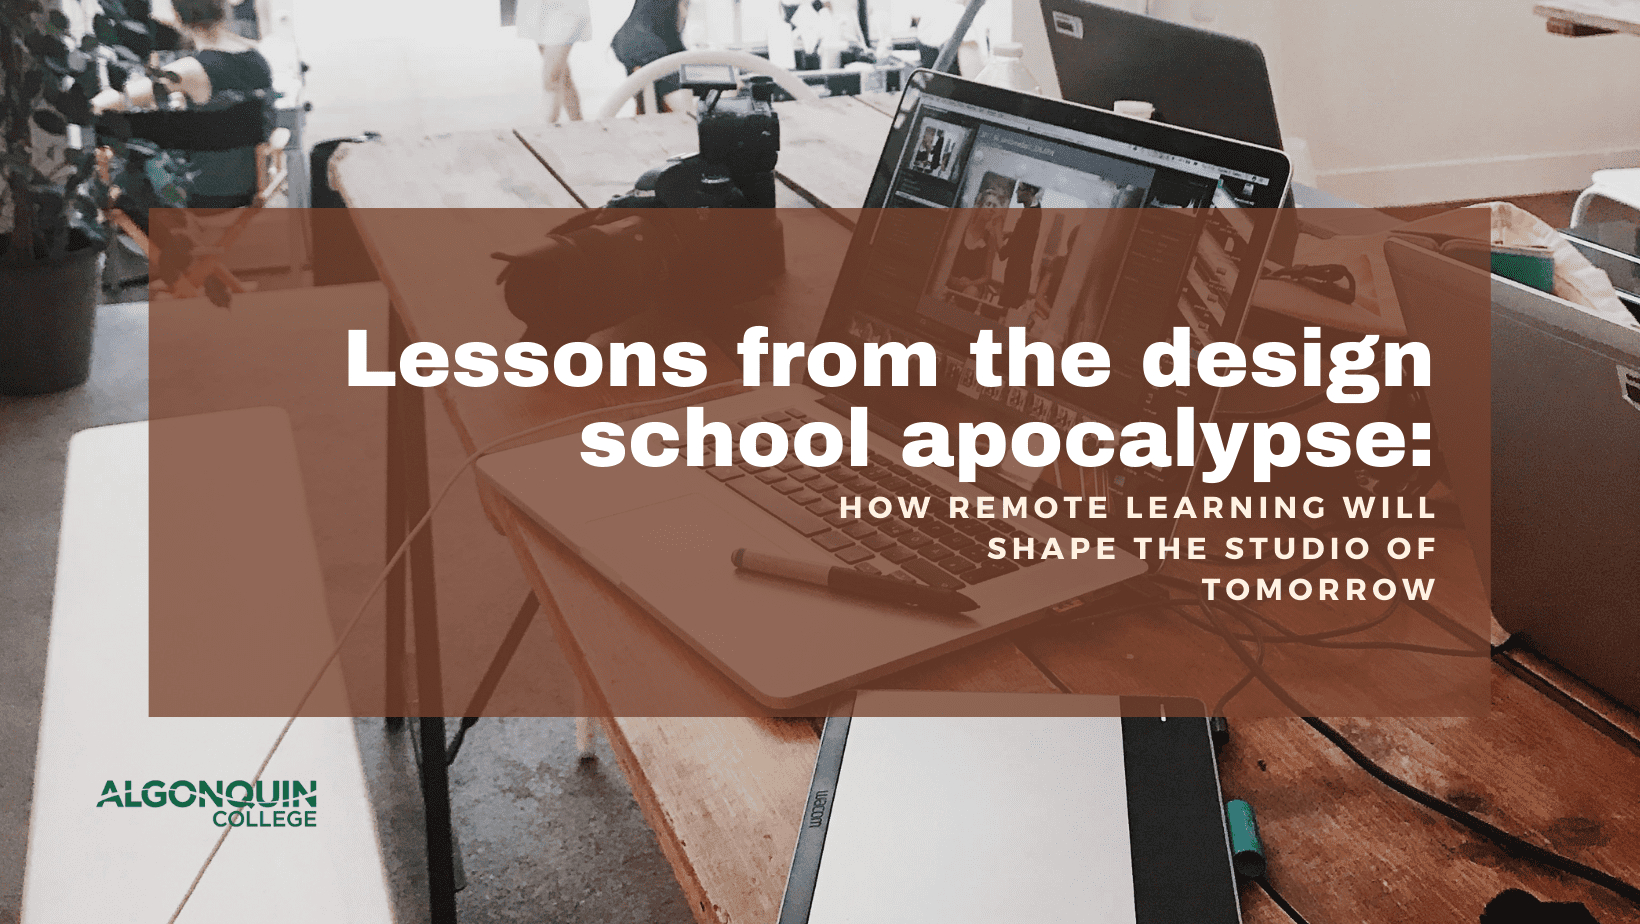 Lessons from the design school apocalypse: How remote learning will shape the studio of tomorrow